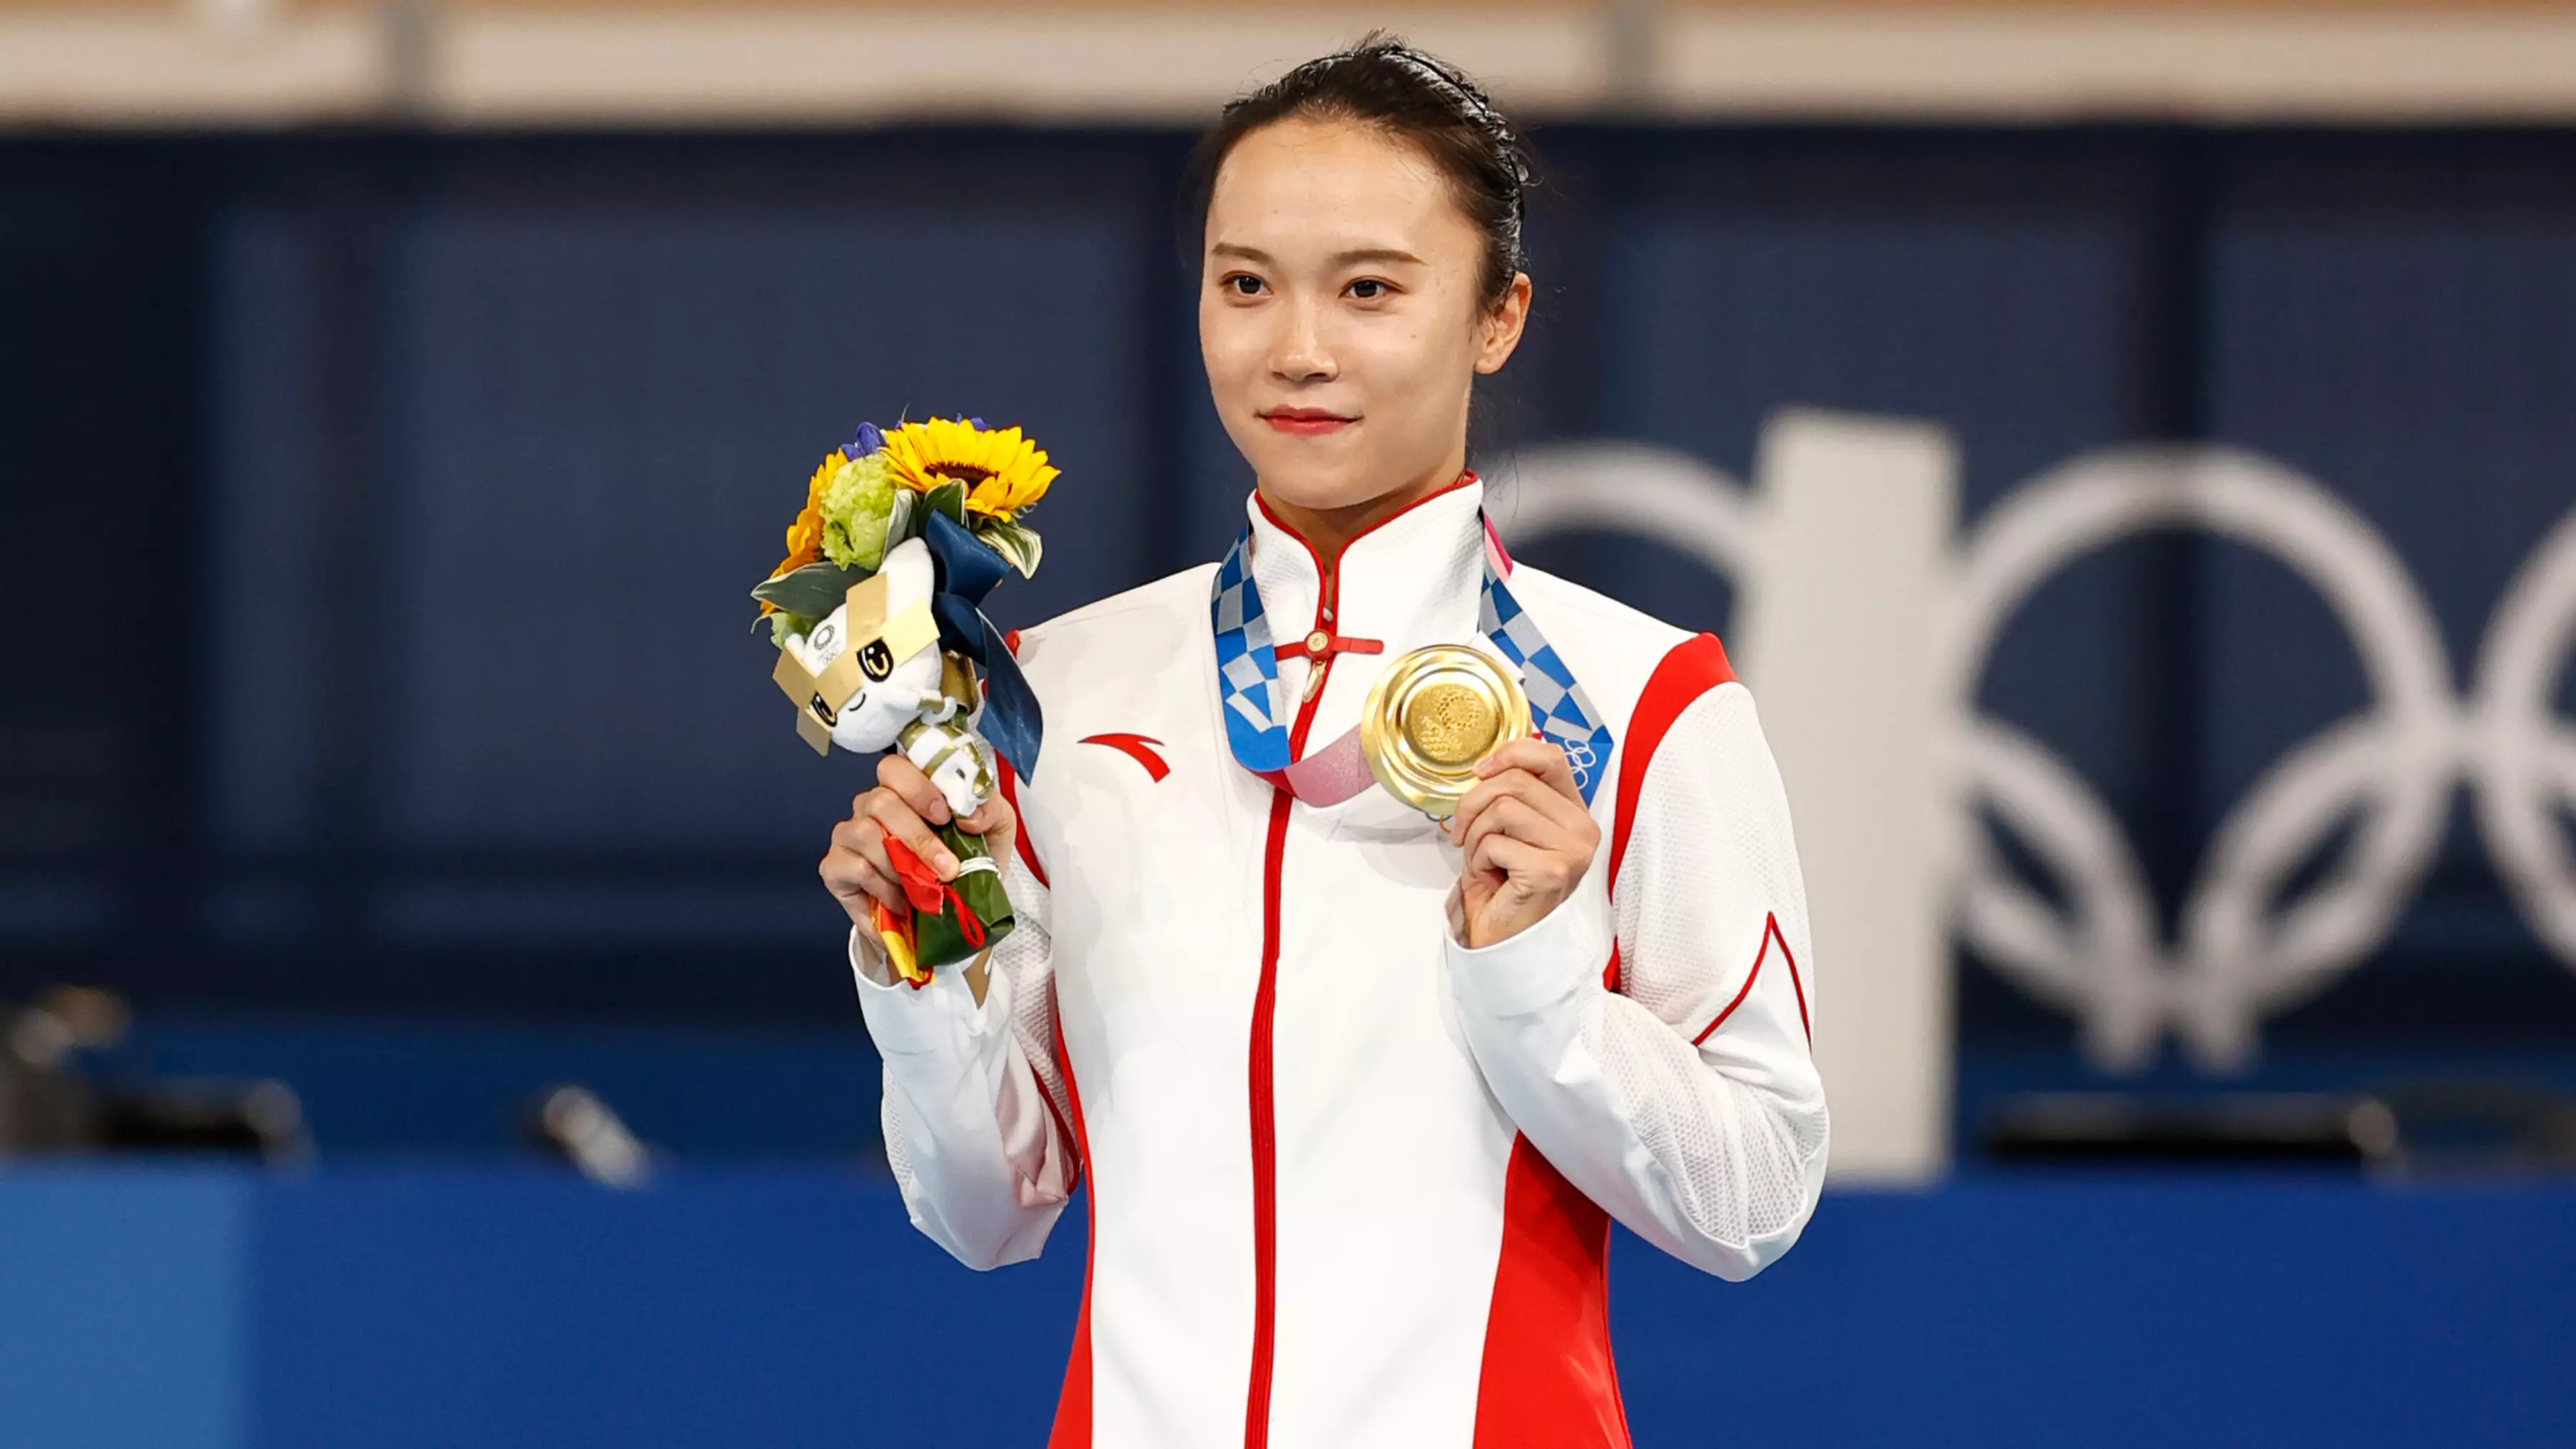 Chinese Gymnast Zhu Xueying Claims Her Gold Olympic Medal Is Peeling